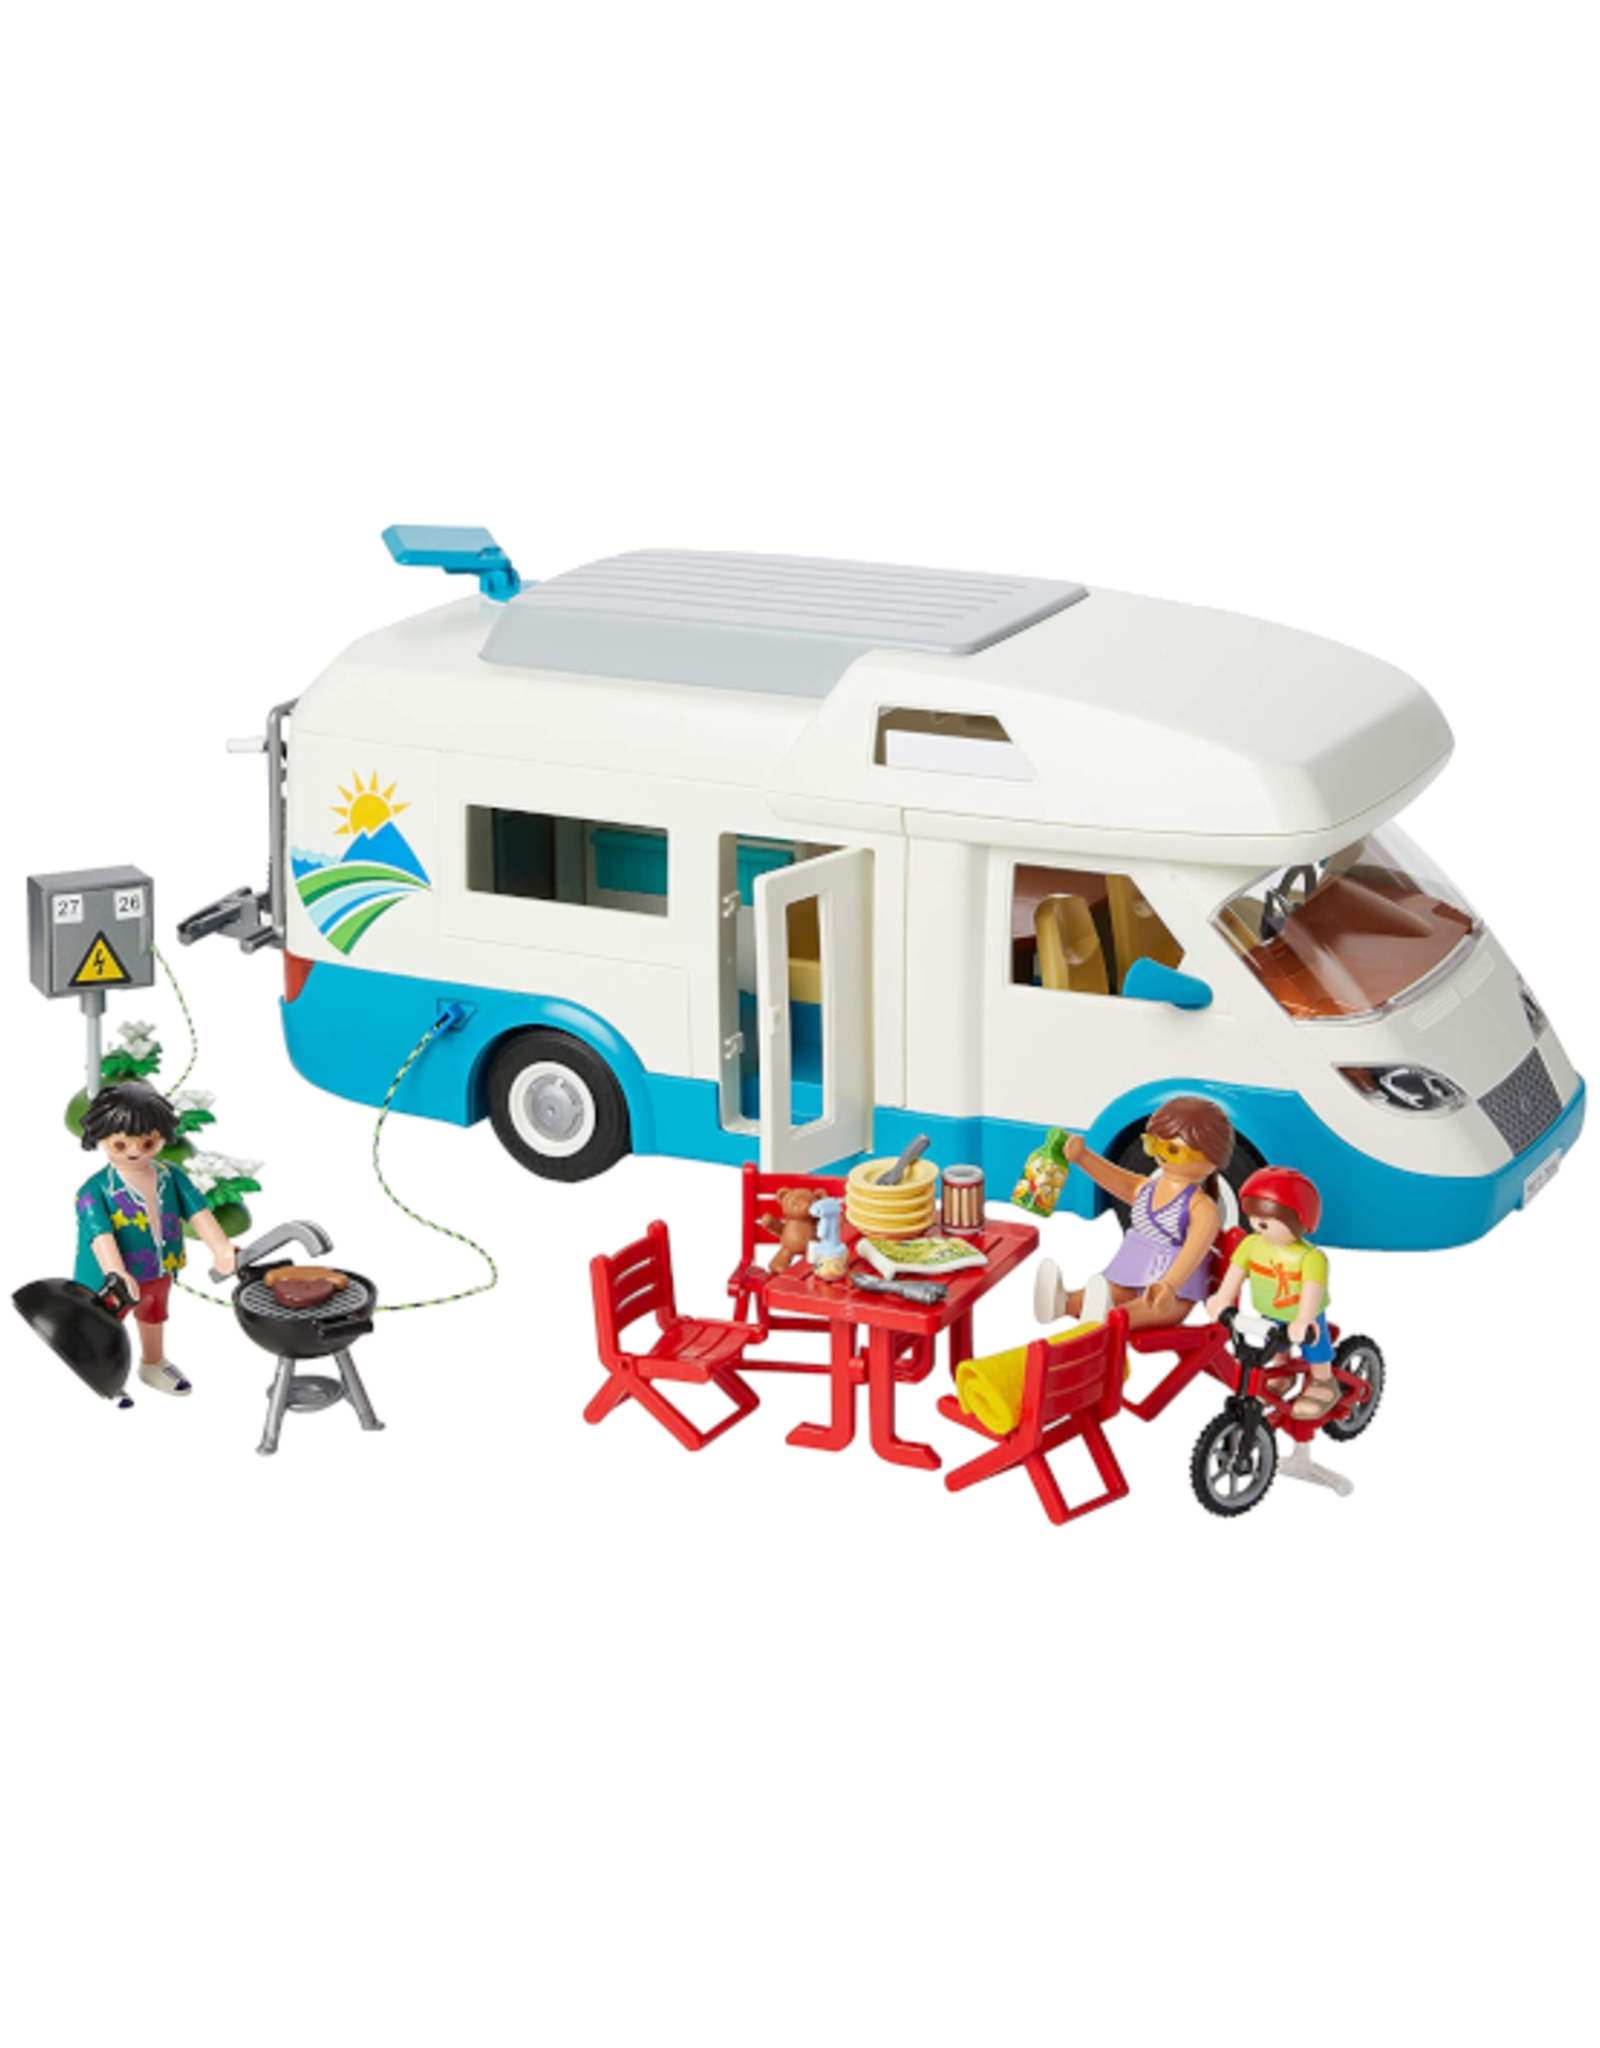 Exclusive Playmobil 9318 Family Fun Camping Mega Set, for Children Ages 4+